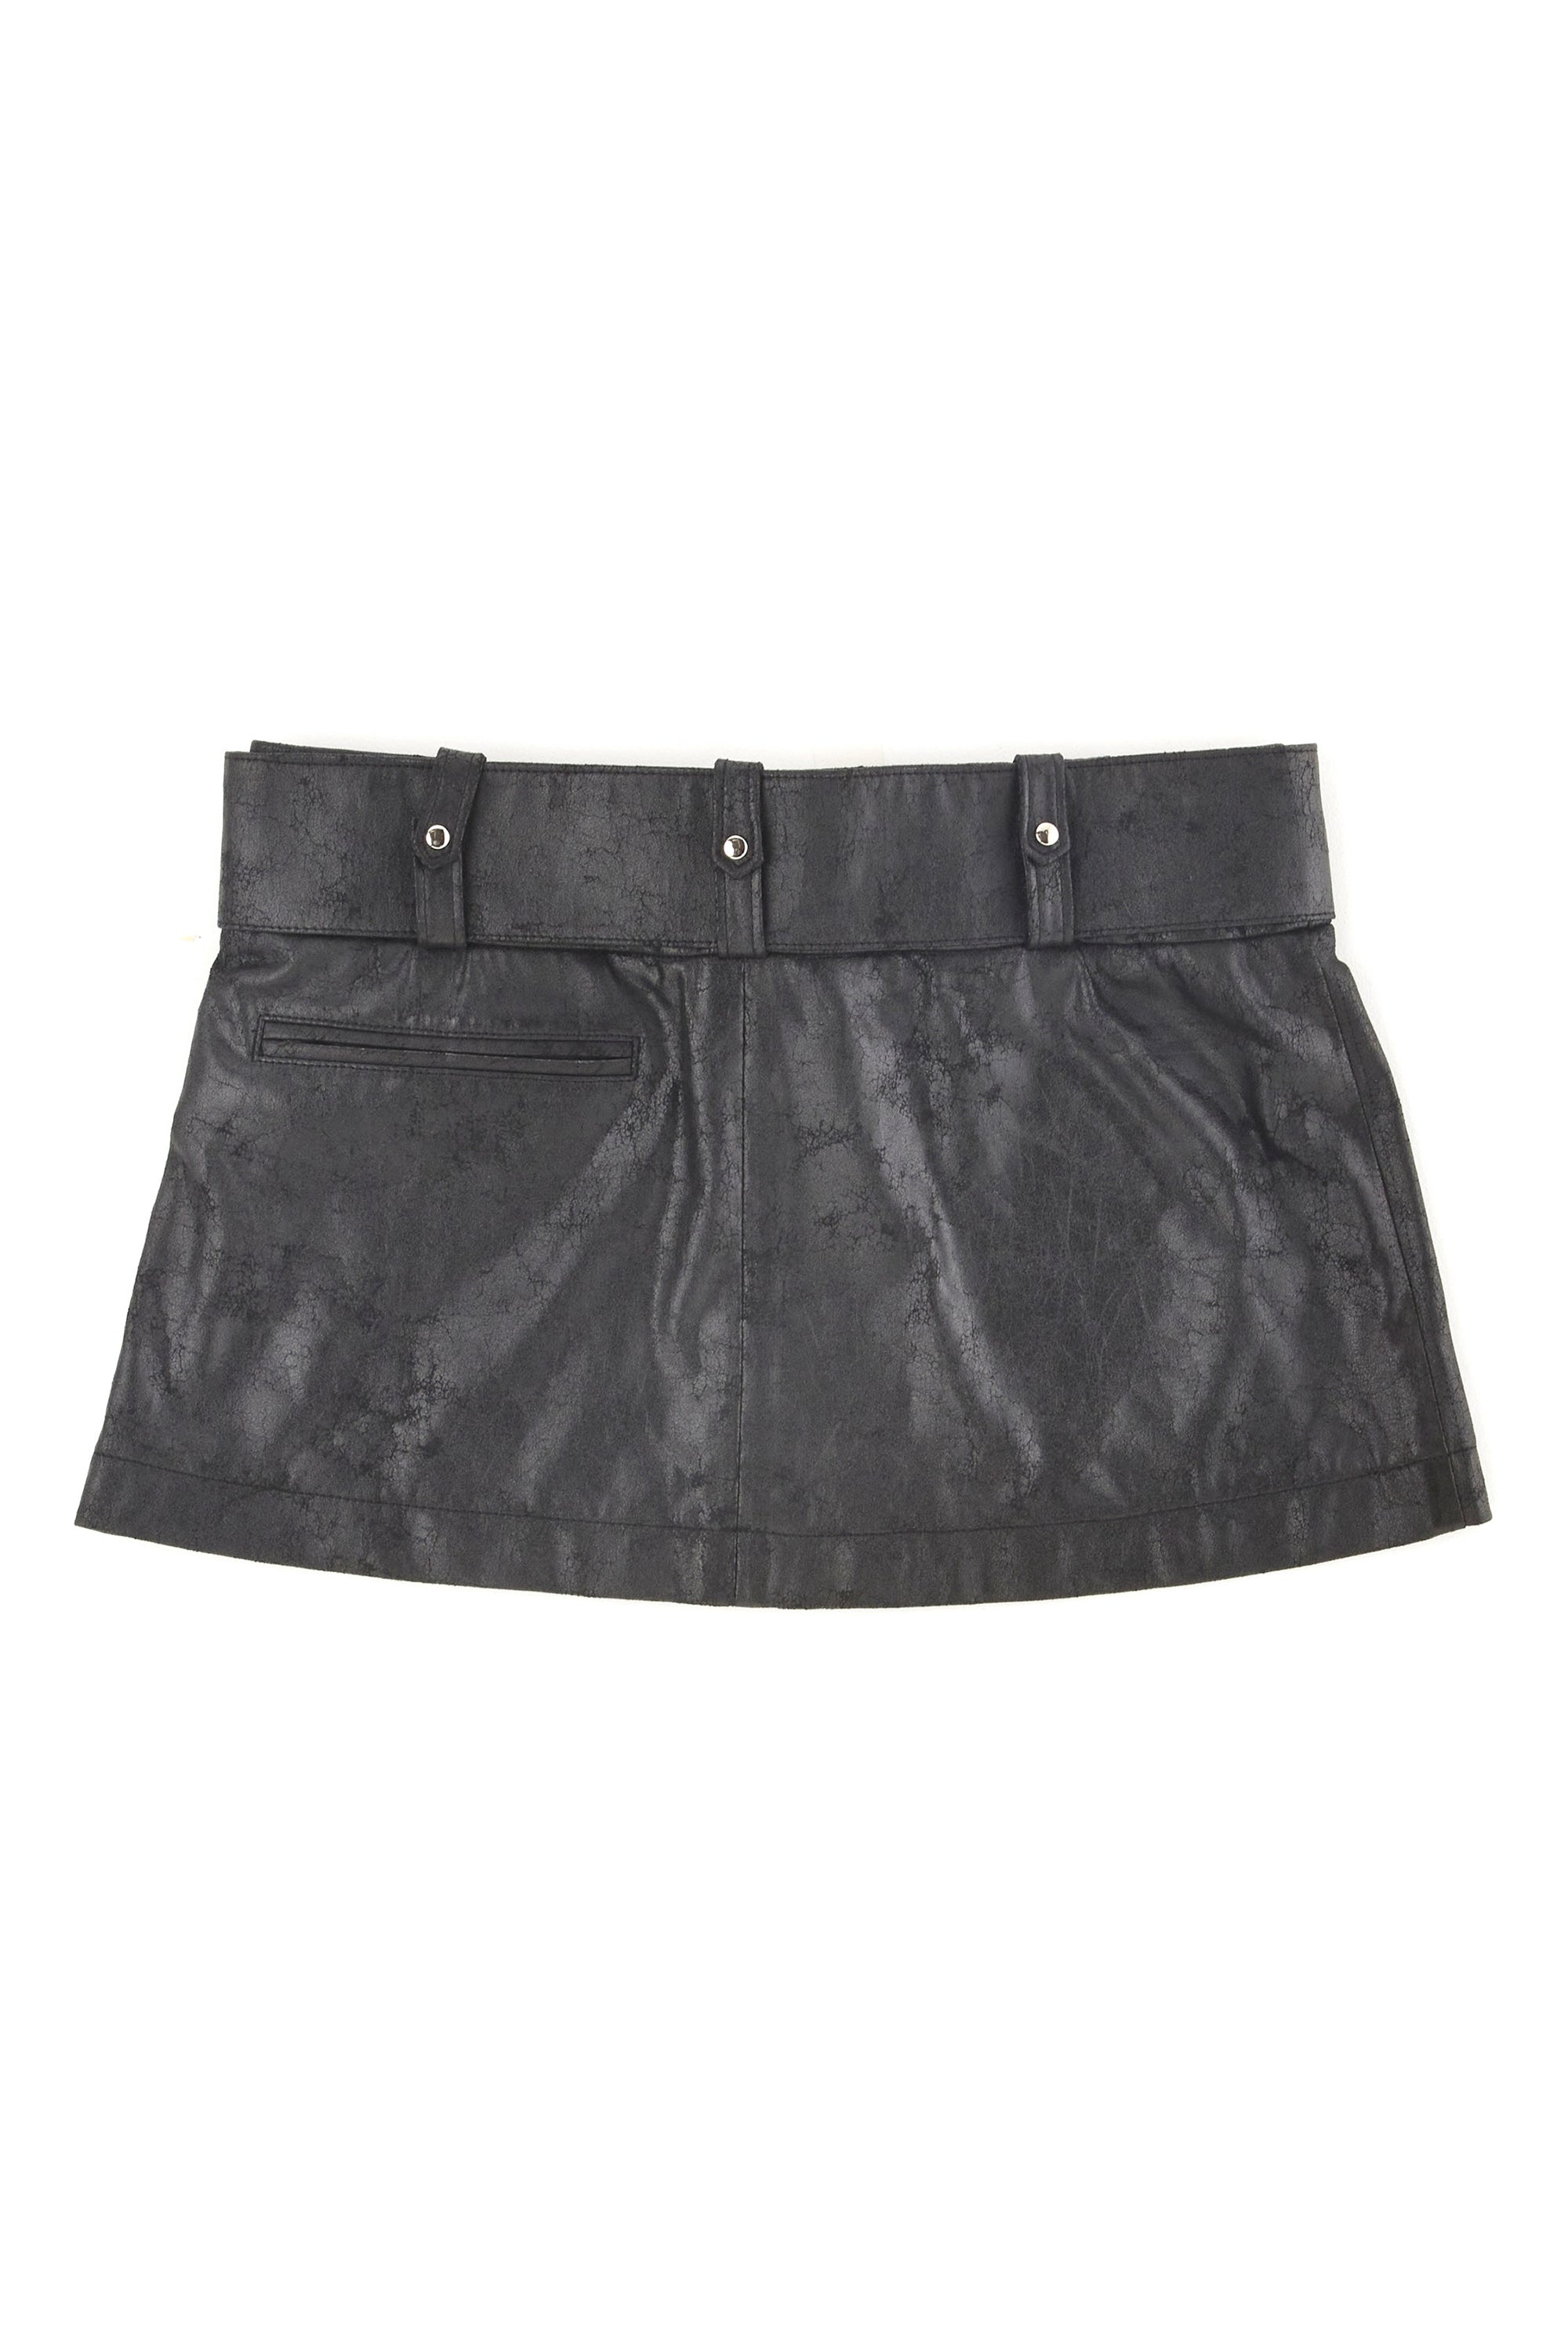 The CRACKED VINYL MINI SKIRT  available online with global shipping, and in PAM Stores Melbourne and Sydney.